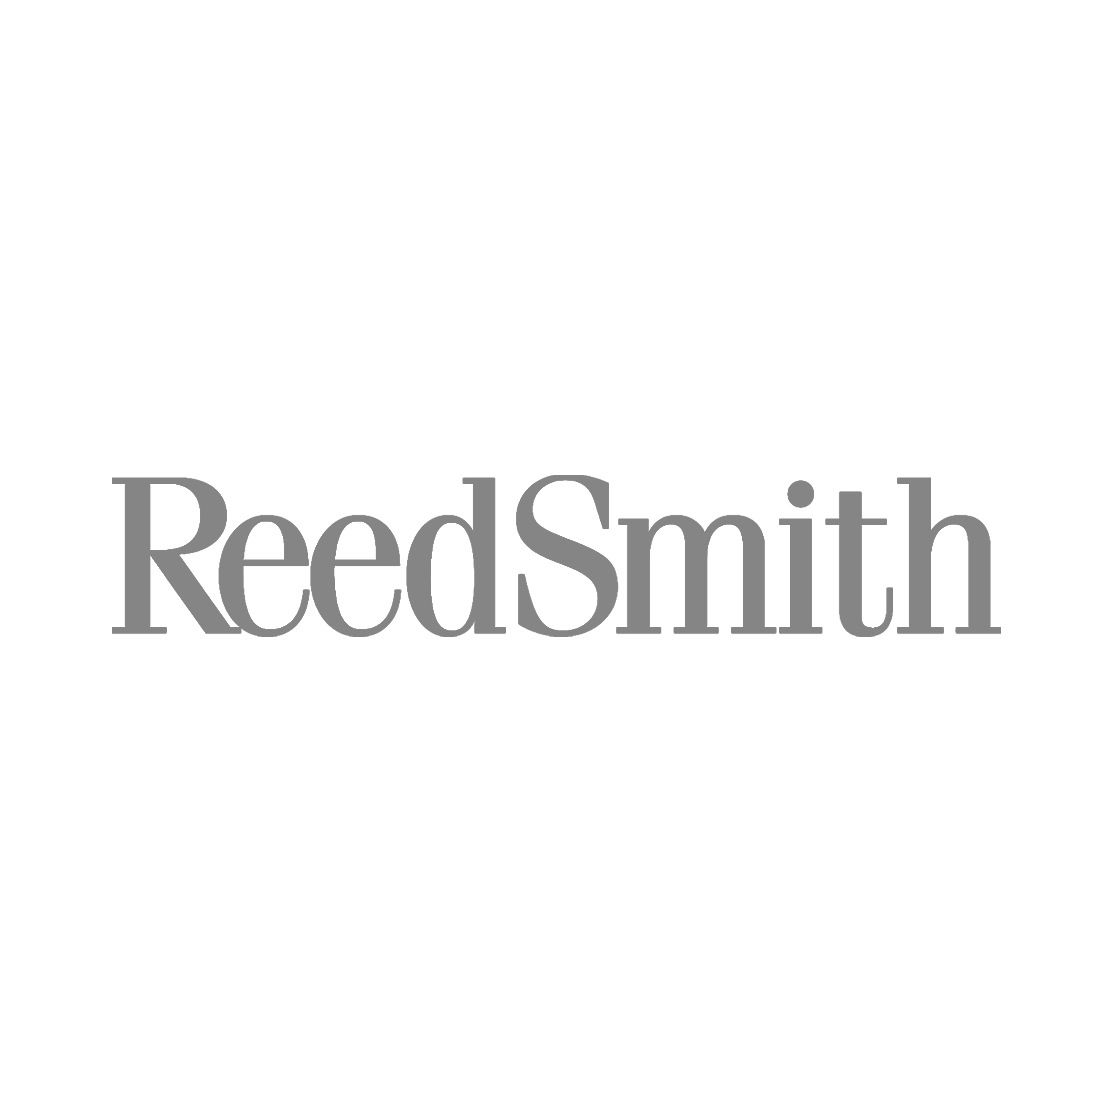 Bartlett-schenk-clients-Reed-Smith.png